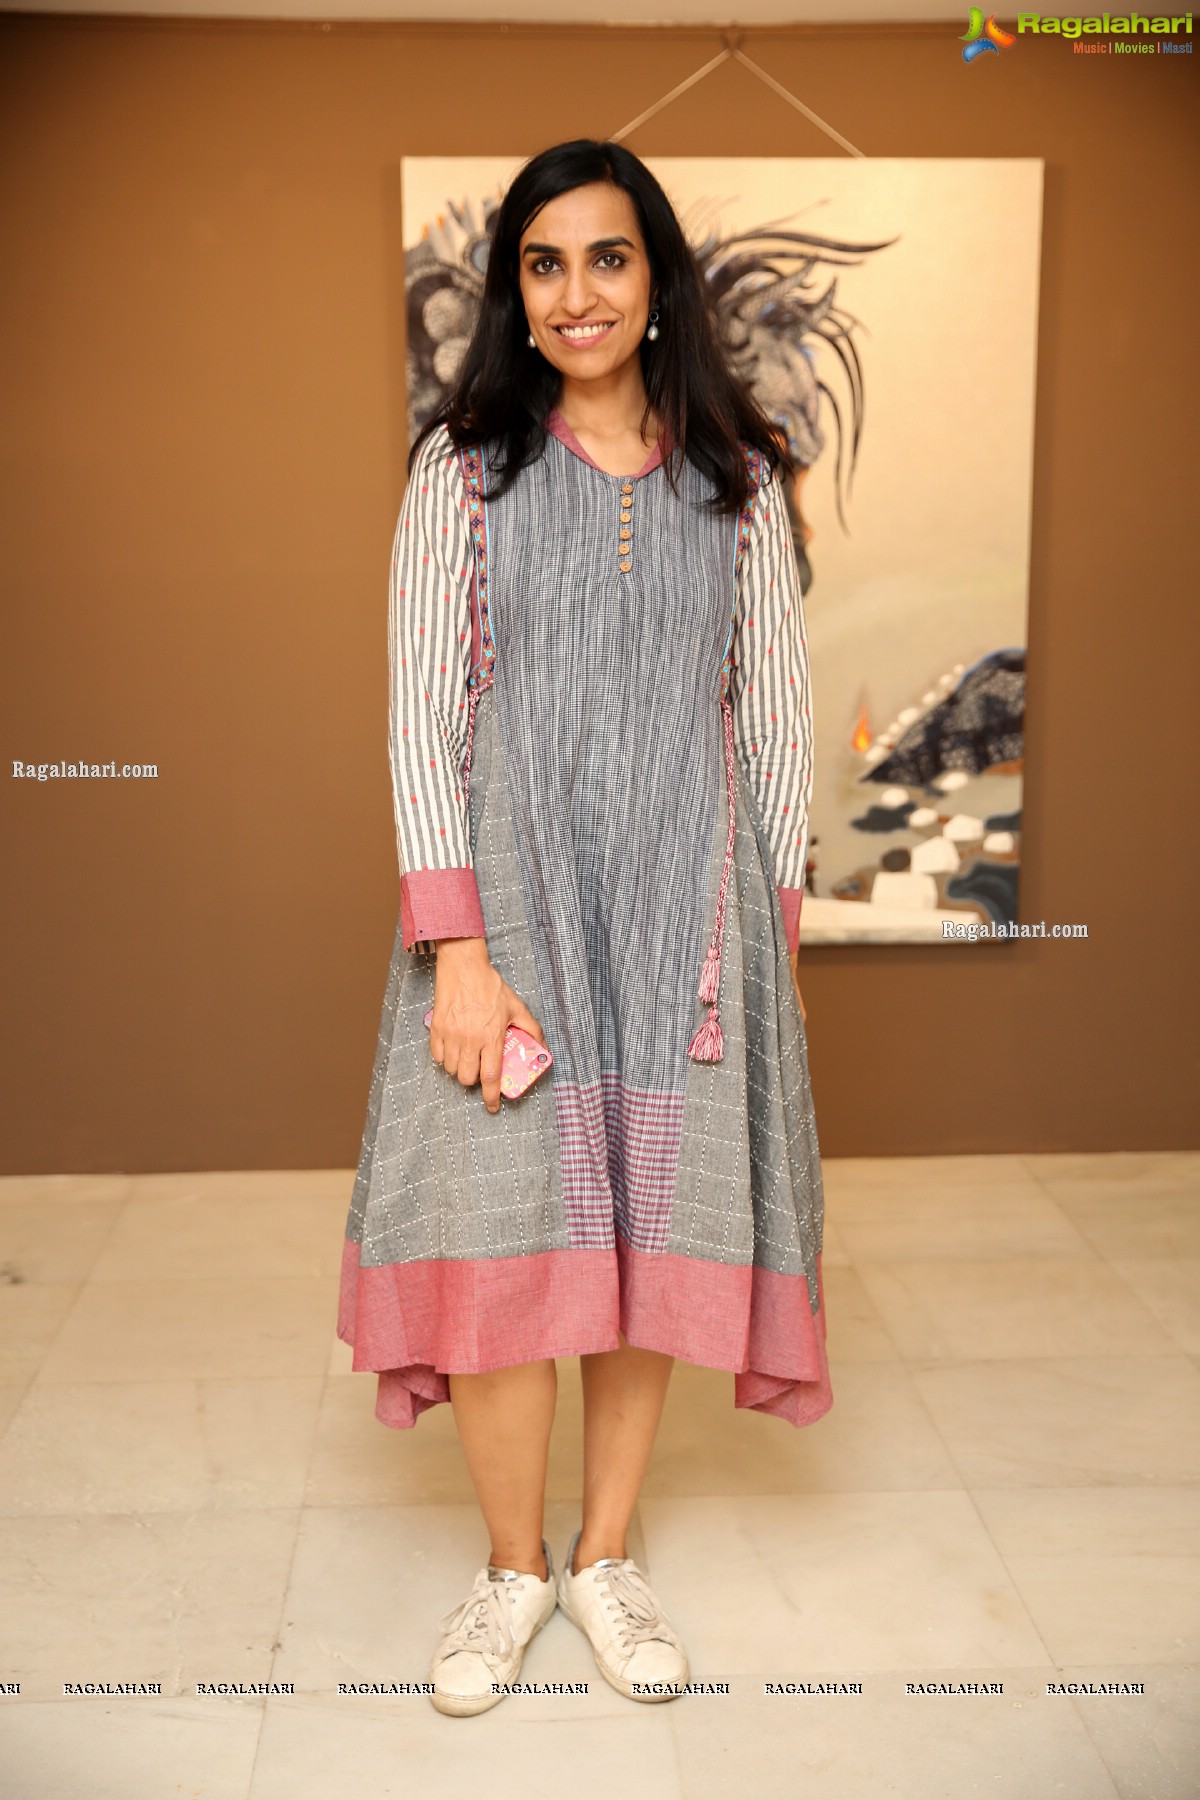 Shrishti Art Gallery Presents Entwined - Stories in Thread and Weave